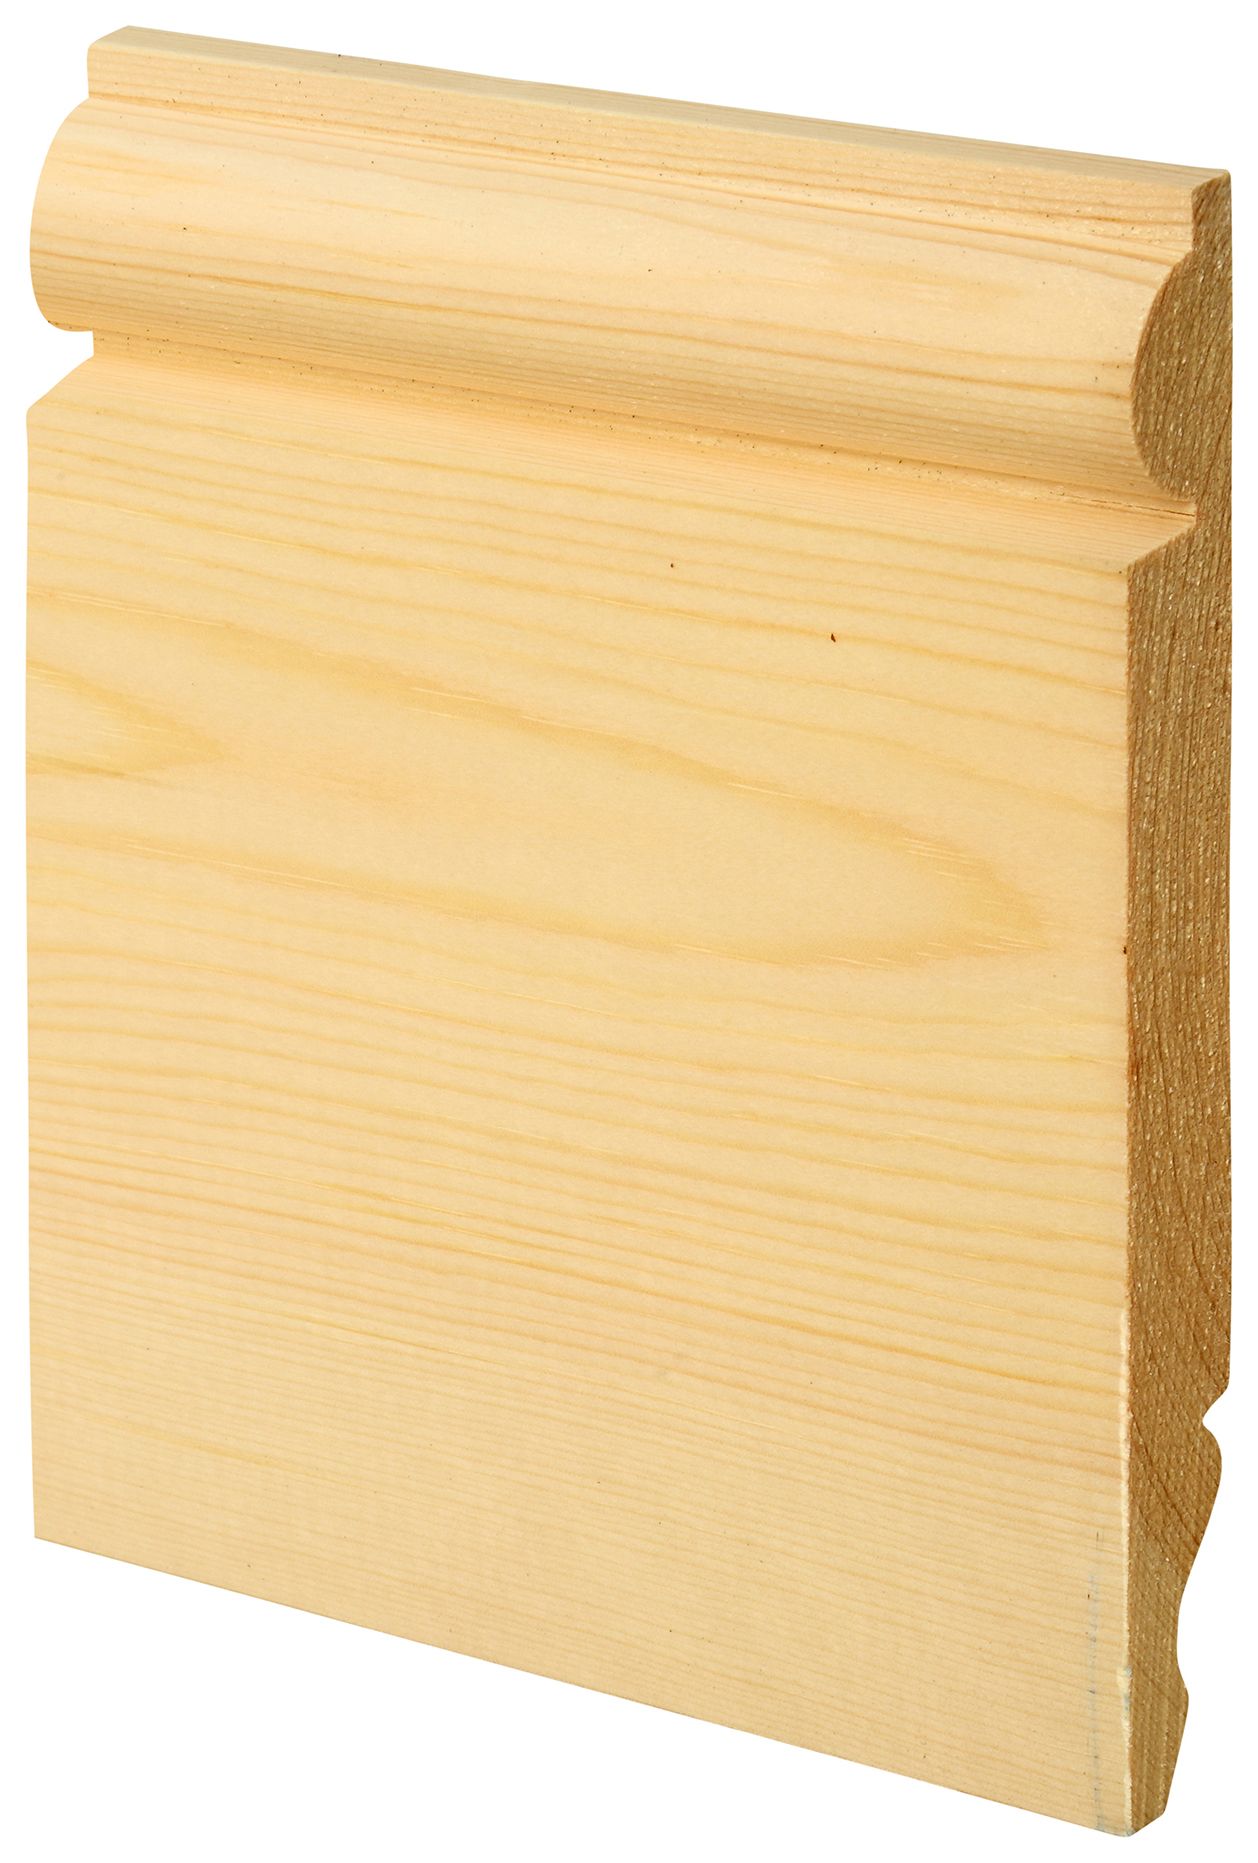 Image of Wickes Torus / Ogee Natural Pine Skirting - 19 x 167 x 4200mm